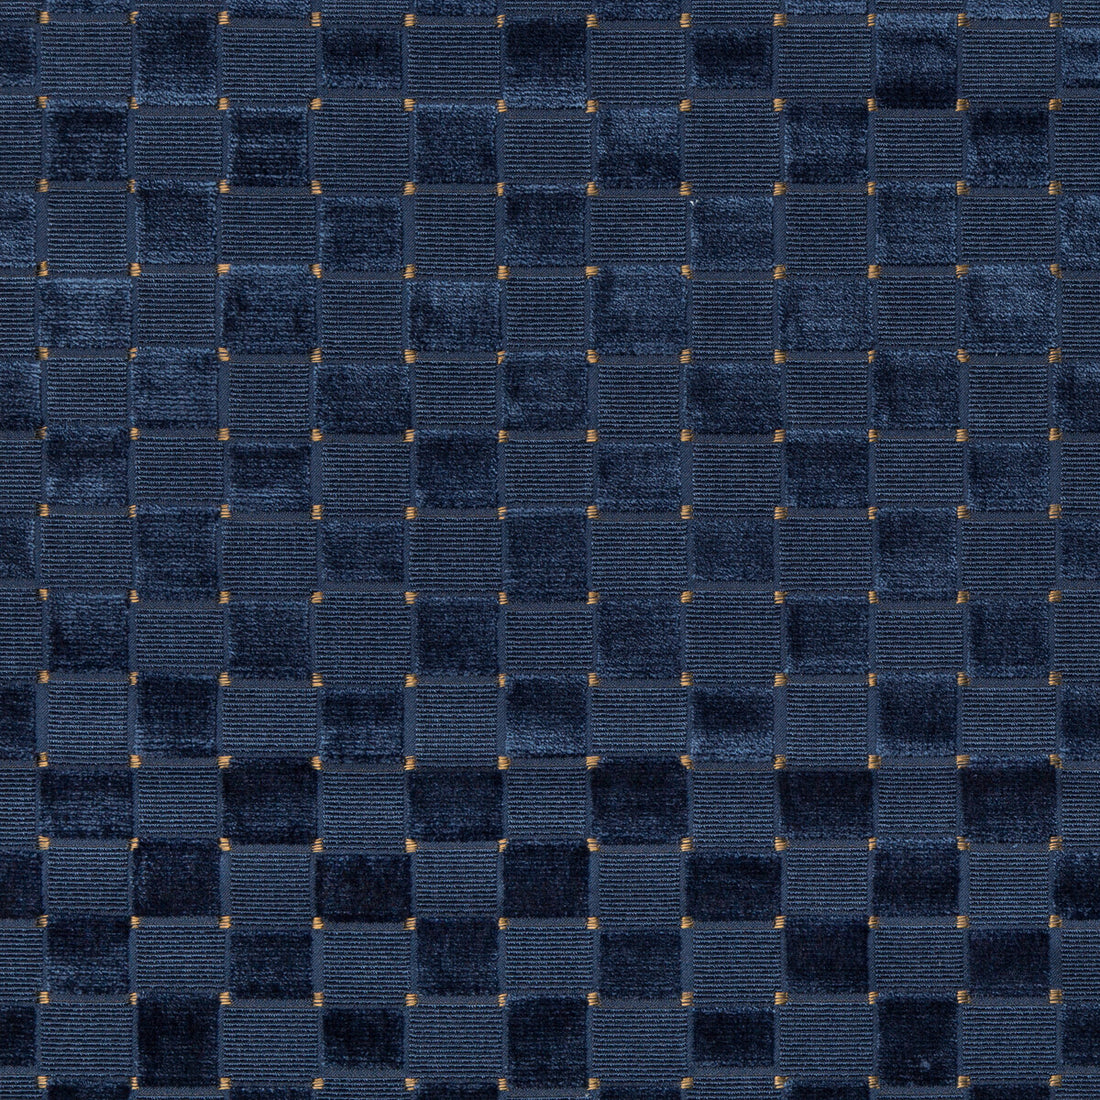 Levens Velvet fabric in navy color - pattern 2019118.50.0 - by Lee Jofa in the Harlington Velvets collection